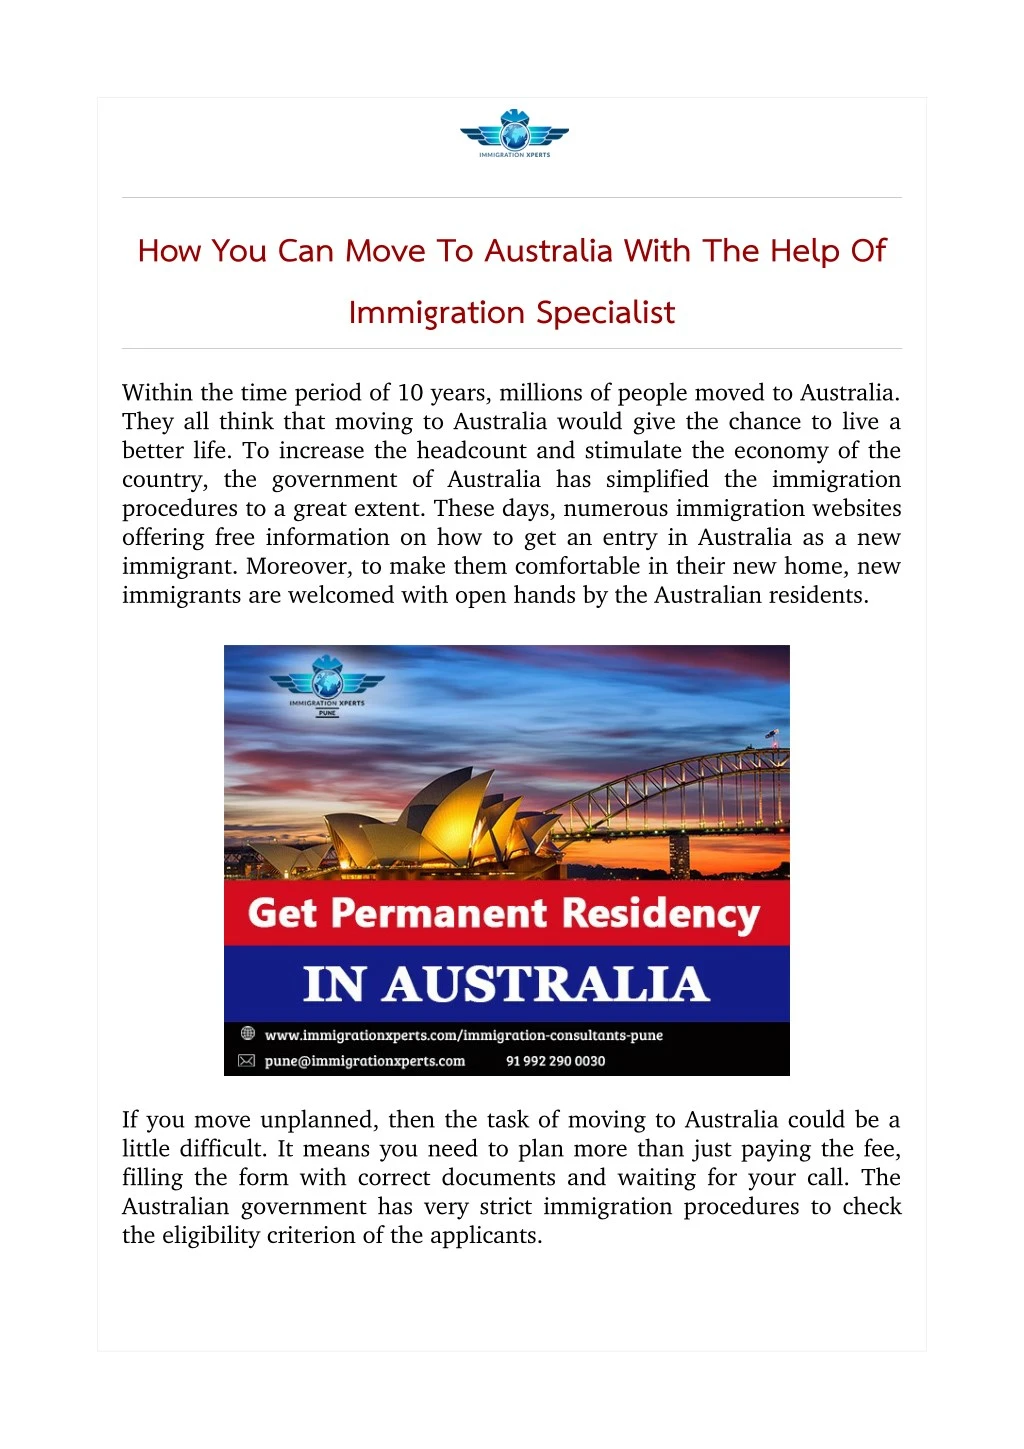 how you can move to australia with the help